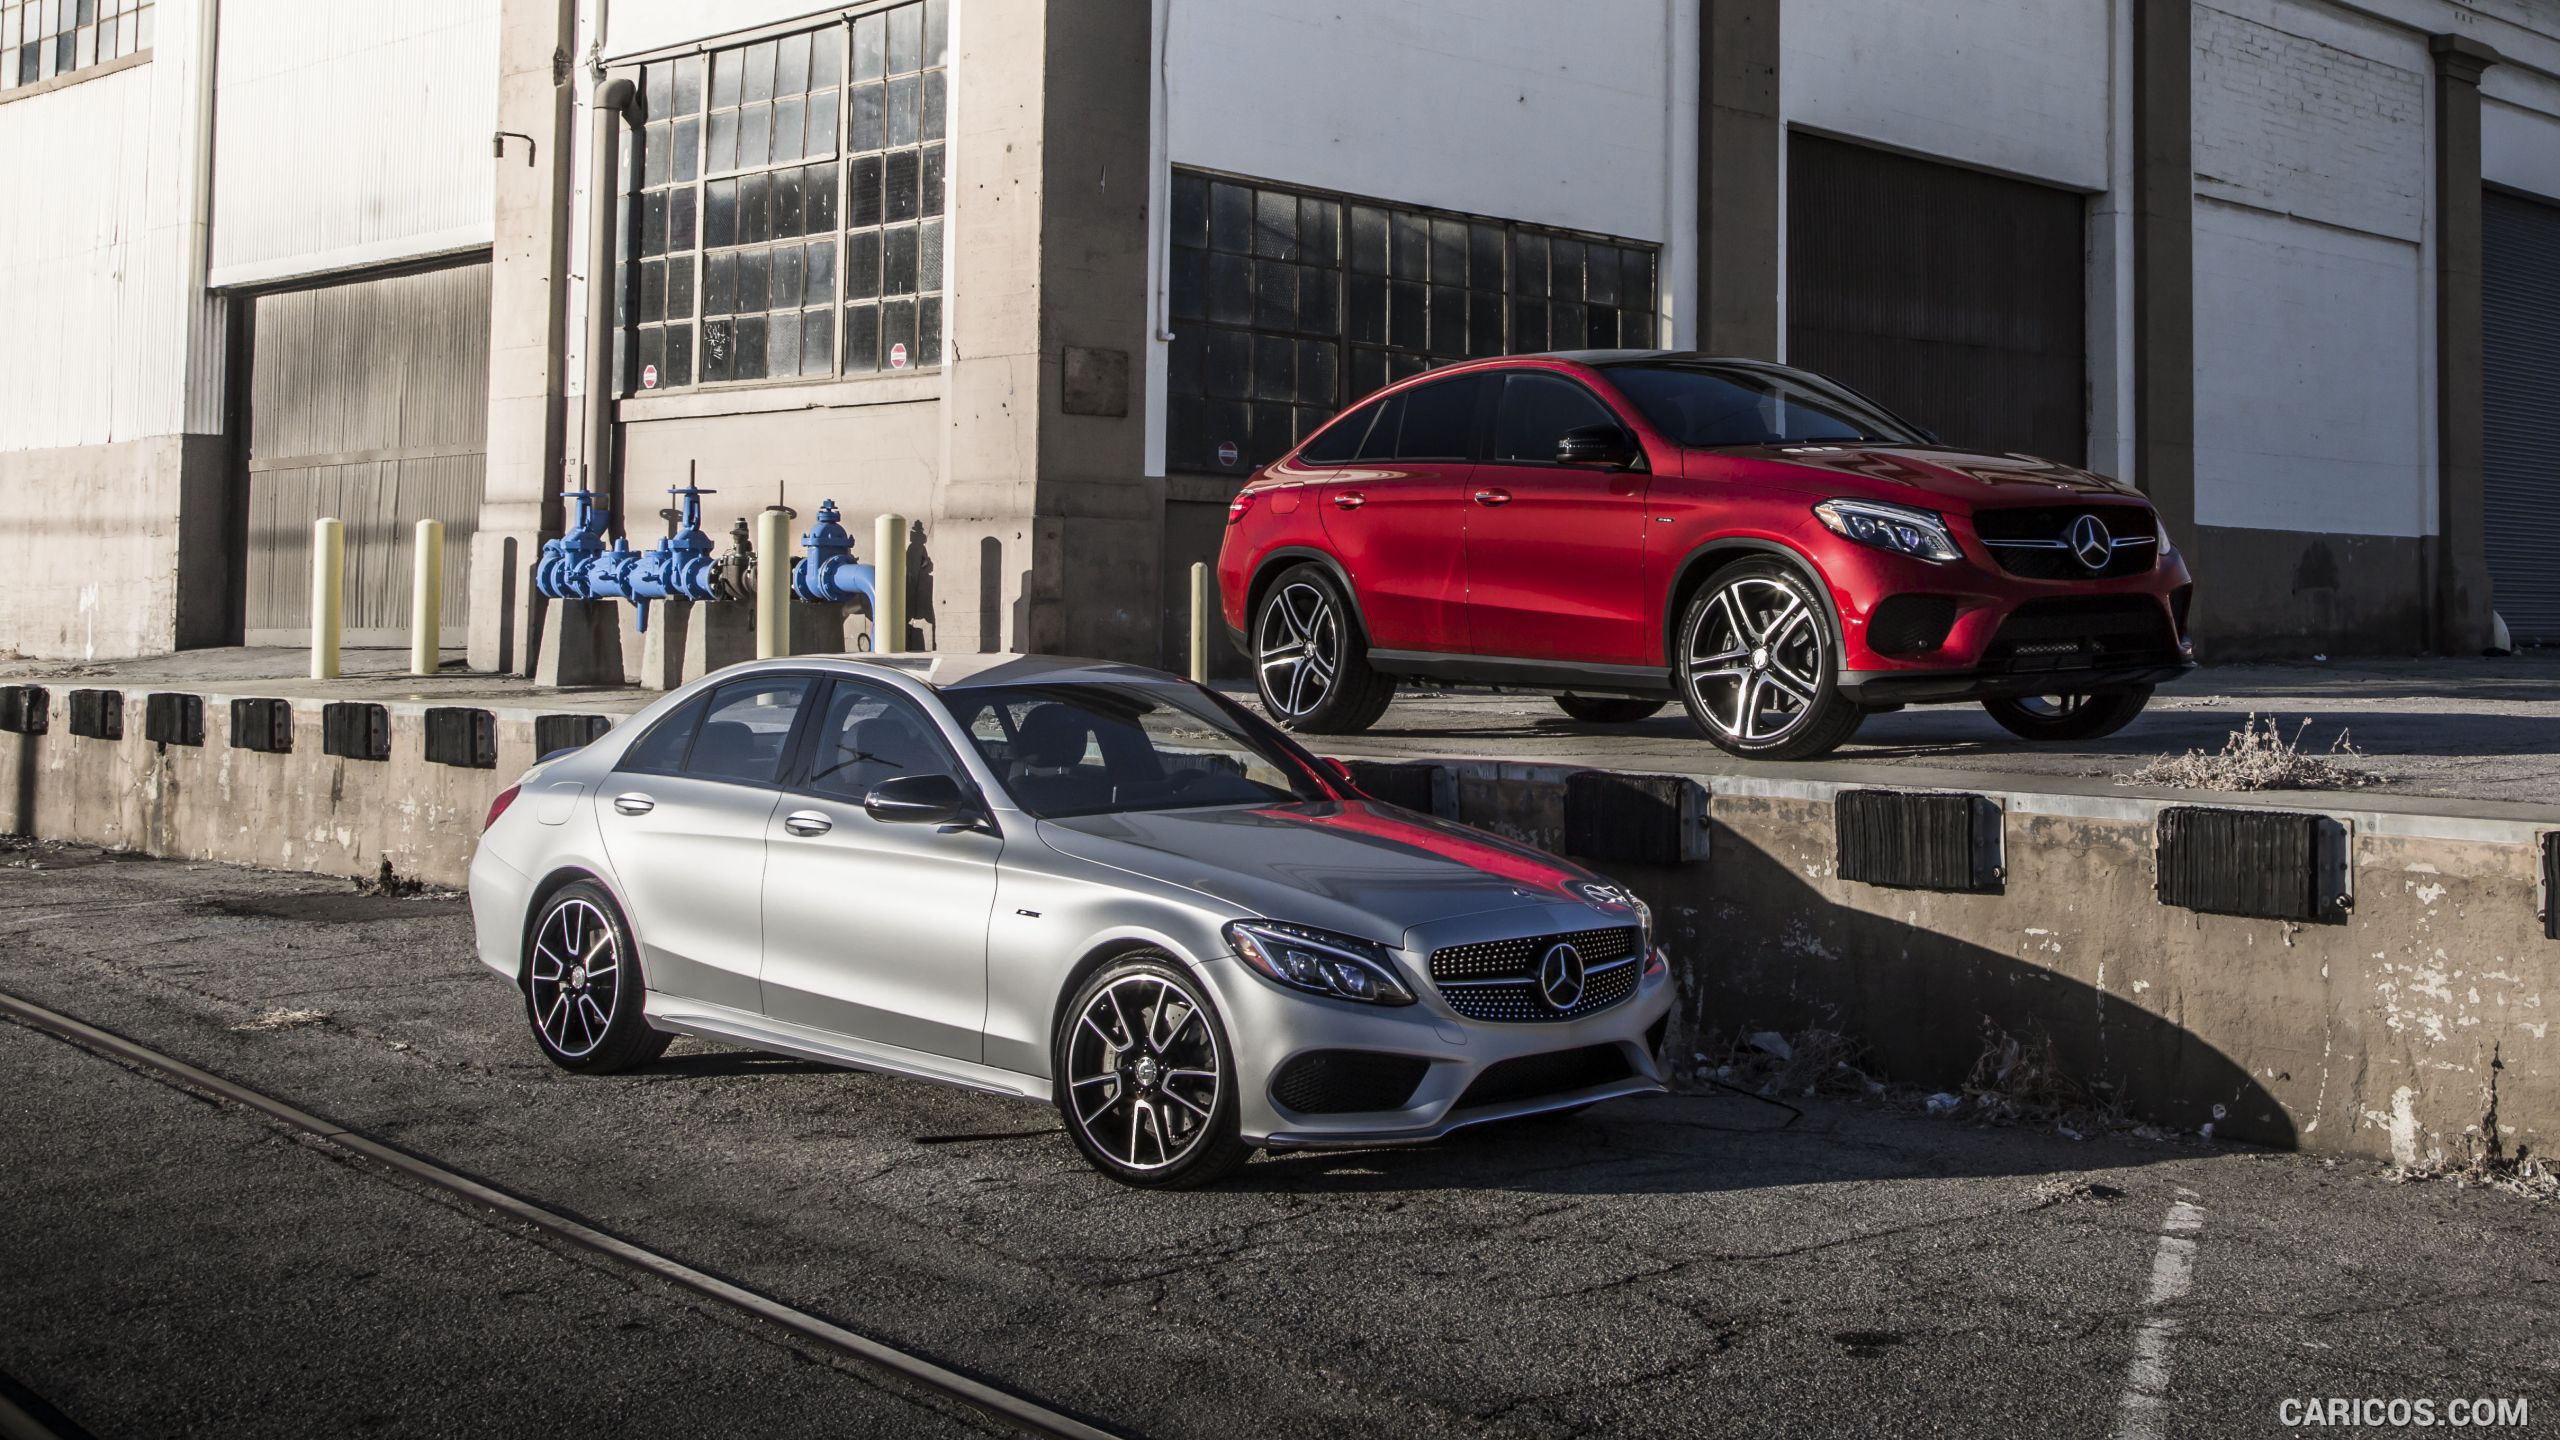 2016 Mercedes-Benz C450 AMG Sedan (US-Spec) and Mercedes-Benz GLE 450 AMG Coupe - Front, #47 of 122